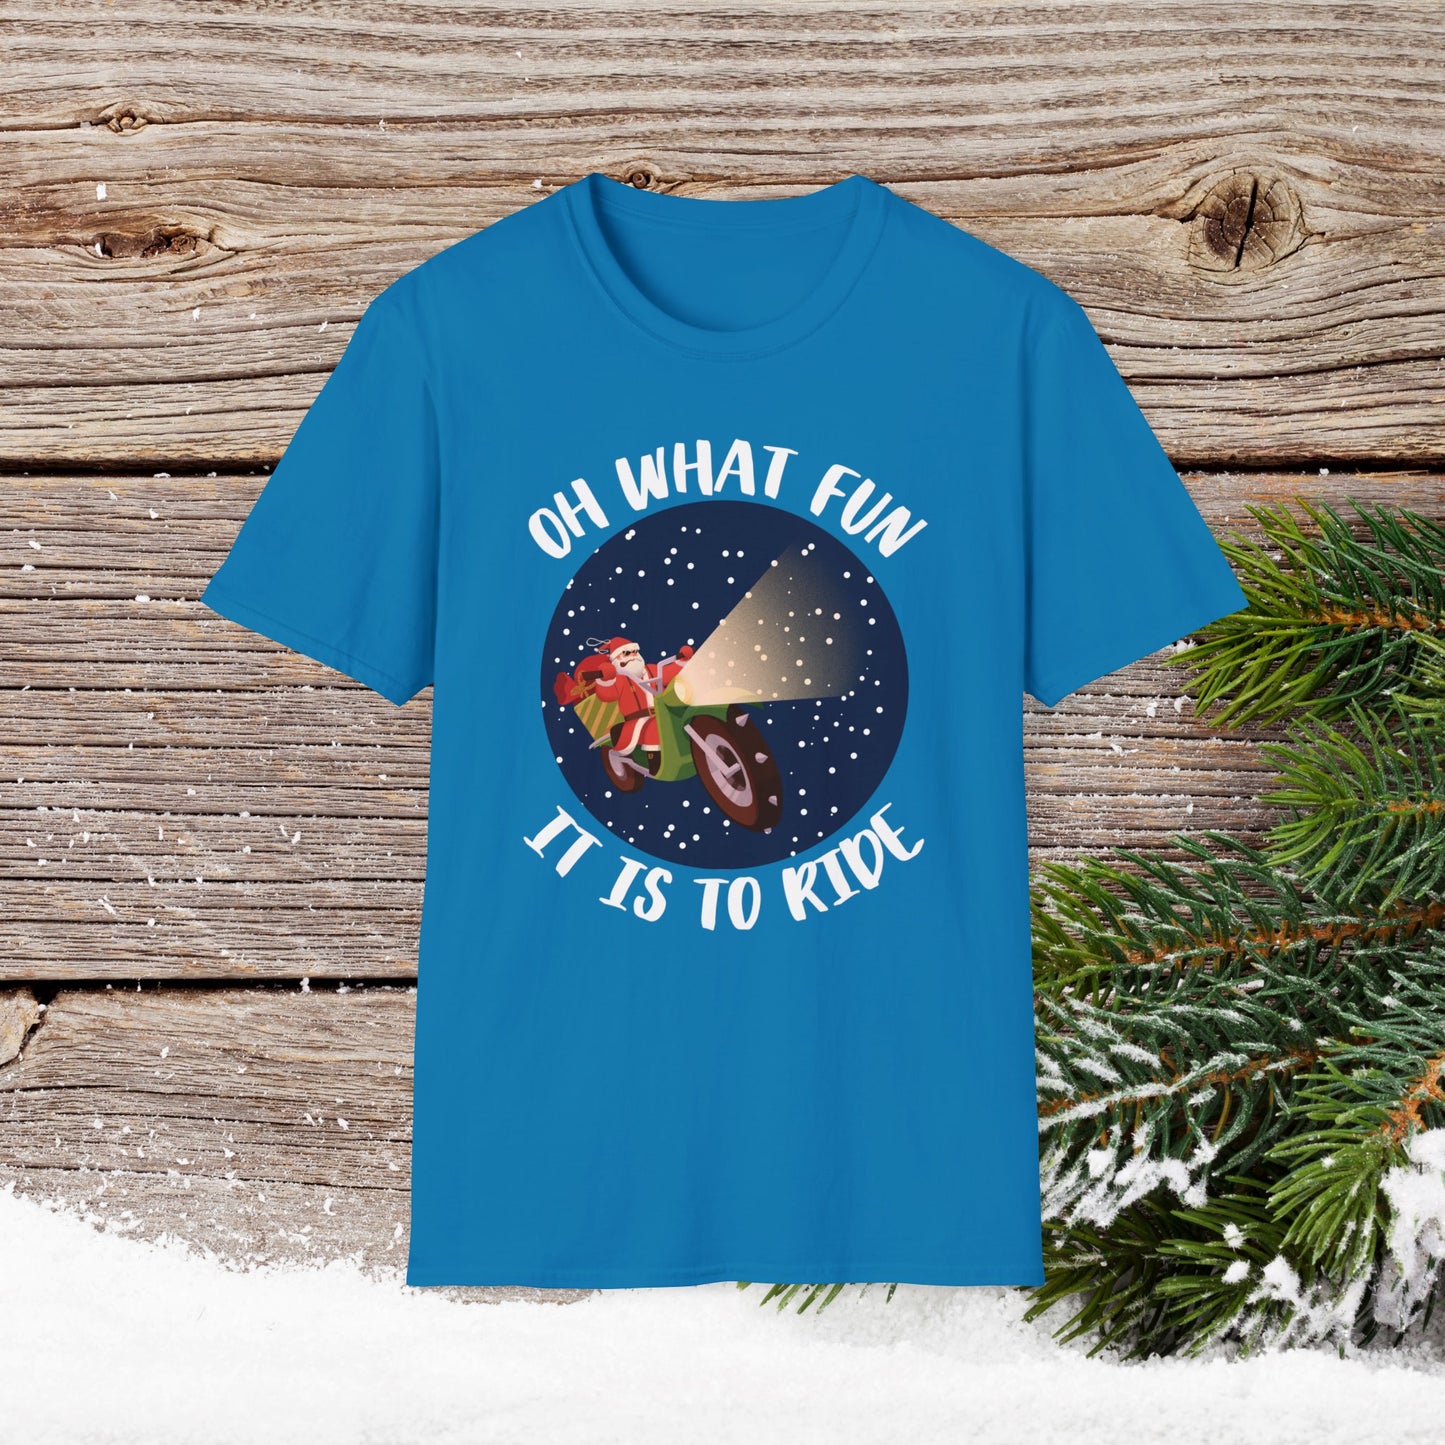 Christmas T-Shirt - Oh What Fun It Is To Ride - Mens anc Boys Christmas Shirts - Youth and Adult Christmas TShirts T-Shirts Graphic Avenue Sapphire Adult Small 